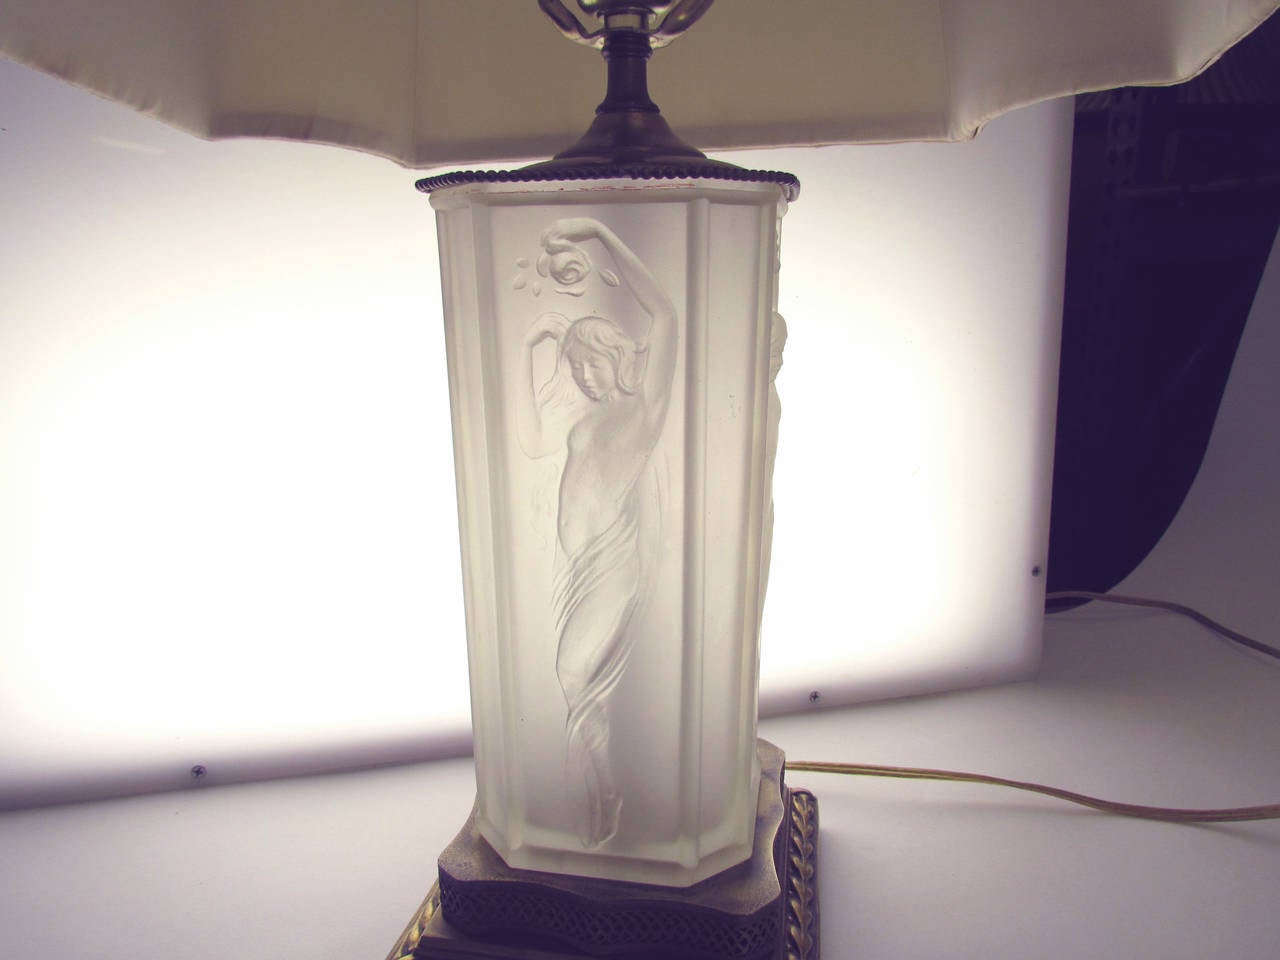 French Pair of Art Nouveau Art Glass Table Lamps in the Manner of Lalique